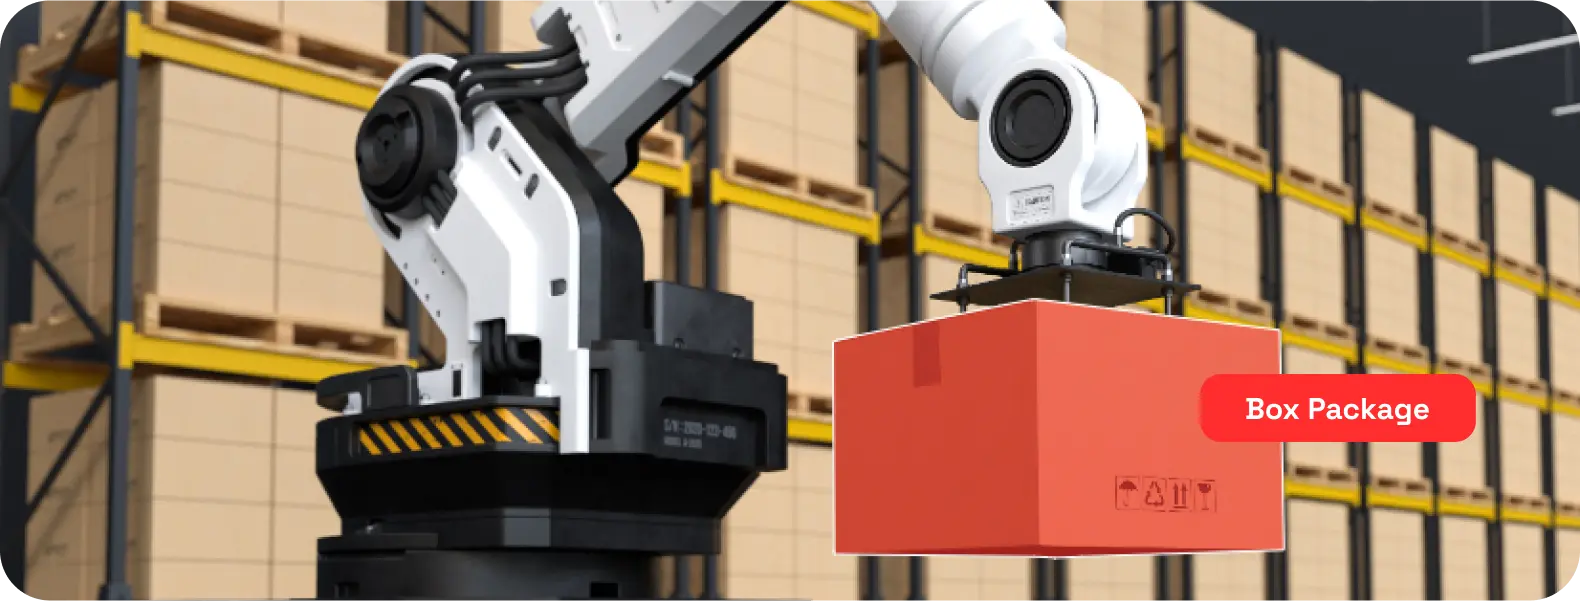 Computer vision in Industrial robots